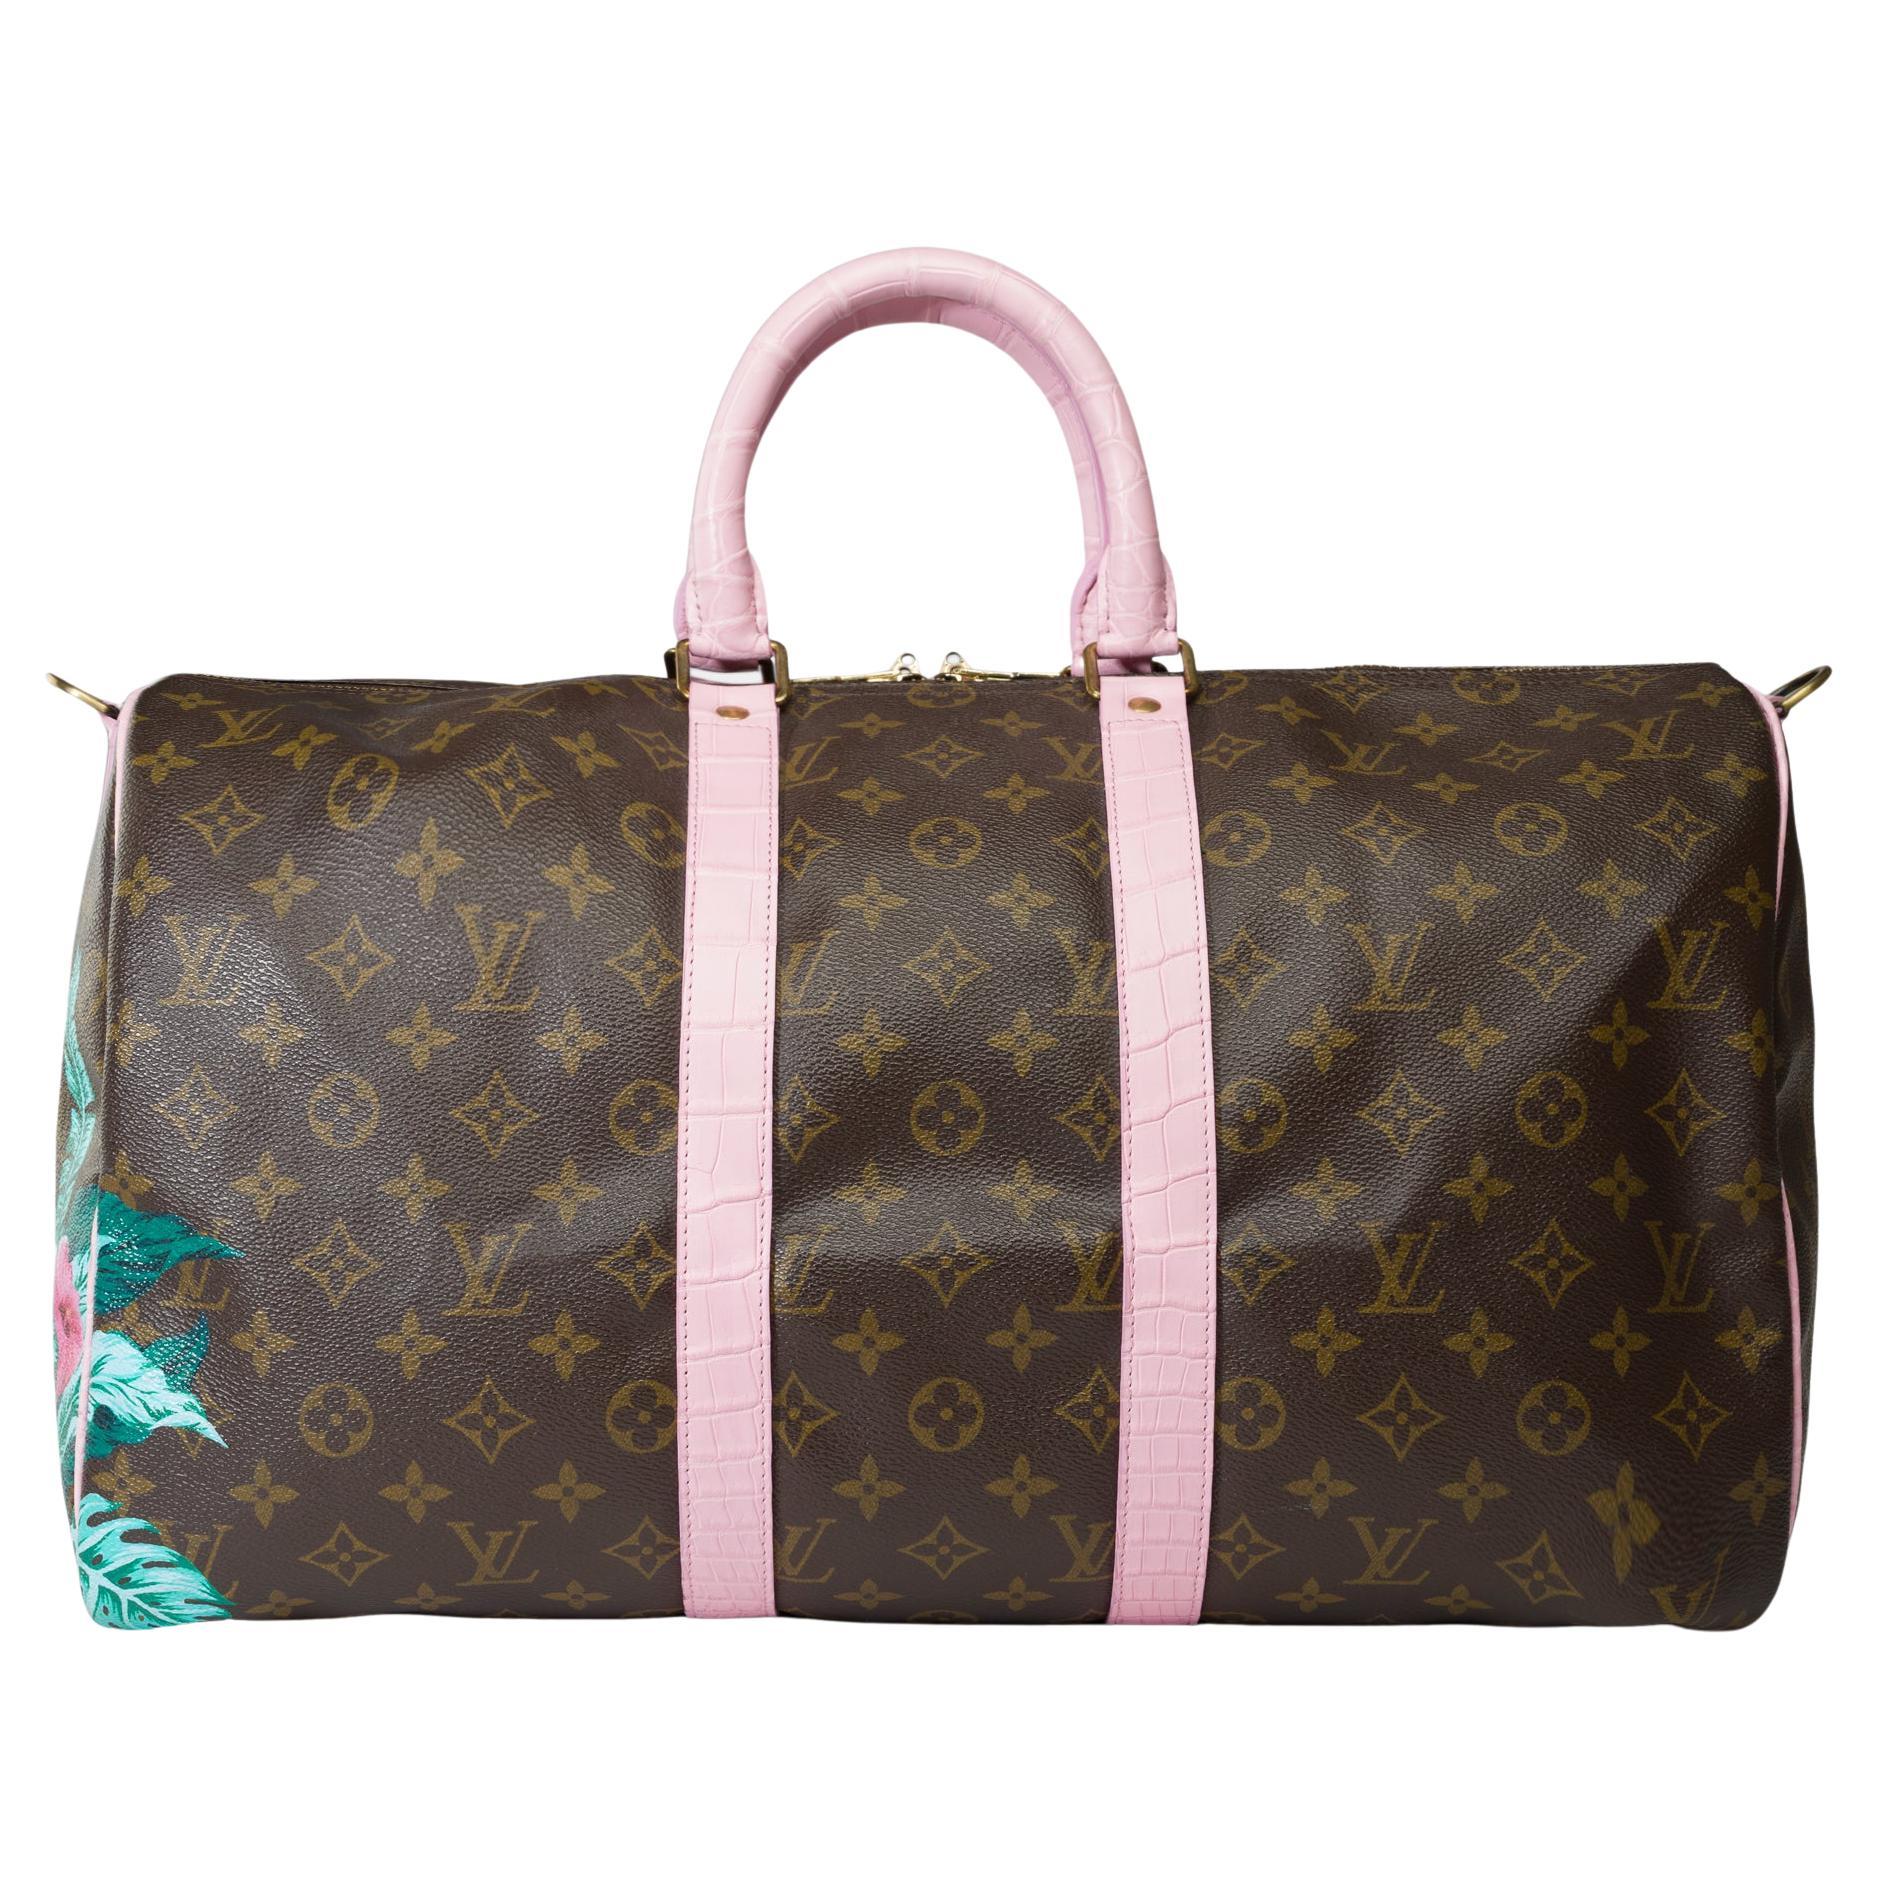 Customized Louis Vuitton Keepall 45 Travel bag with Pink Crocodile leather For Sale